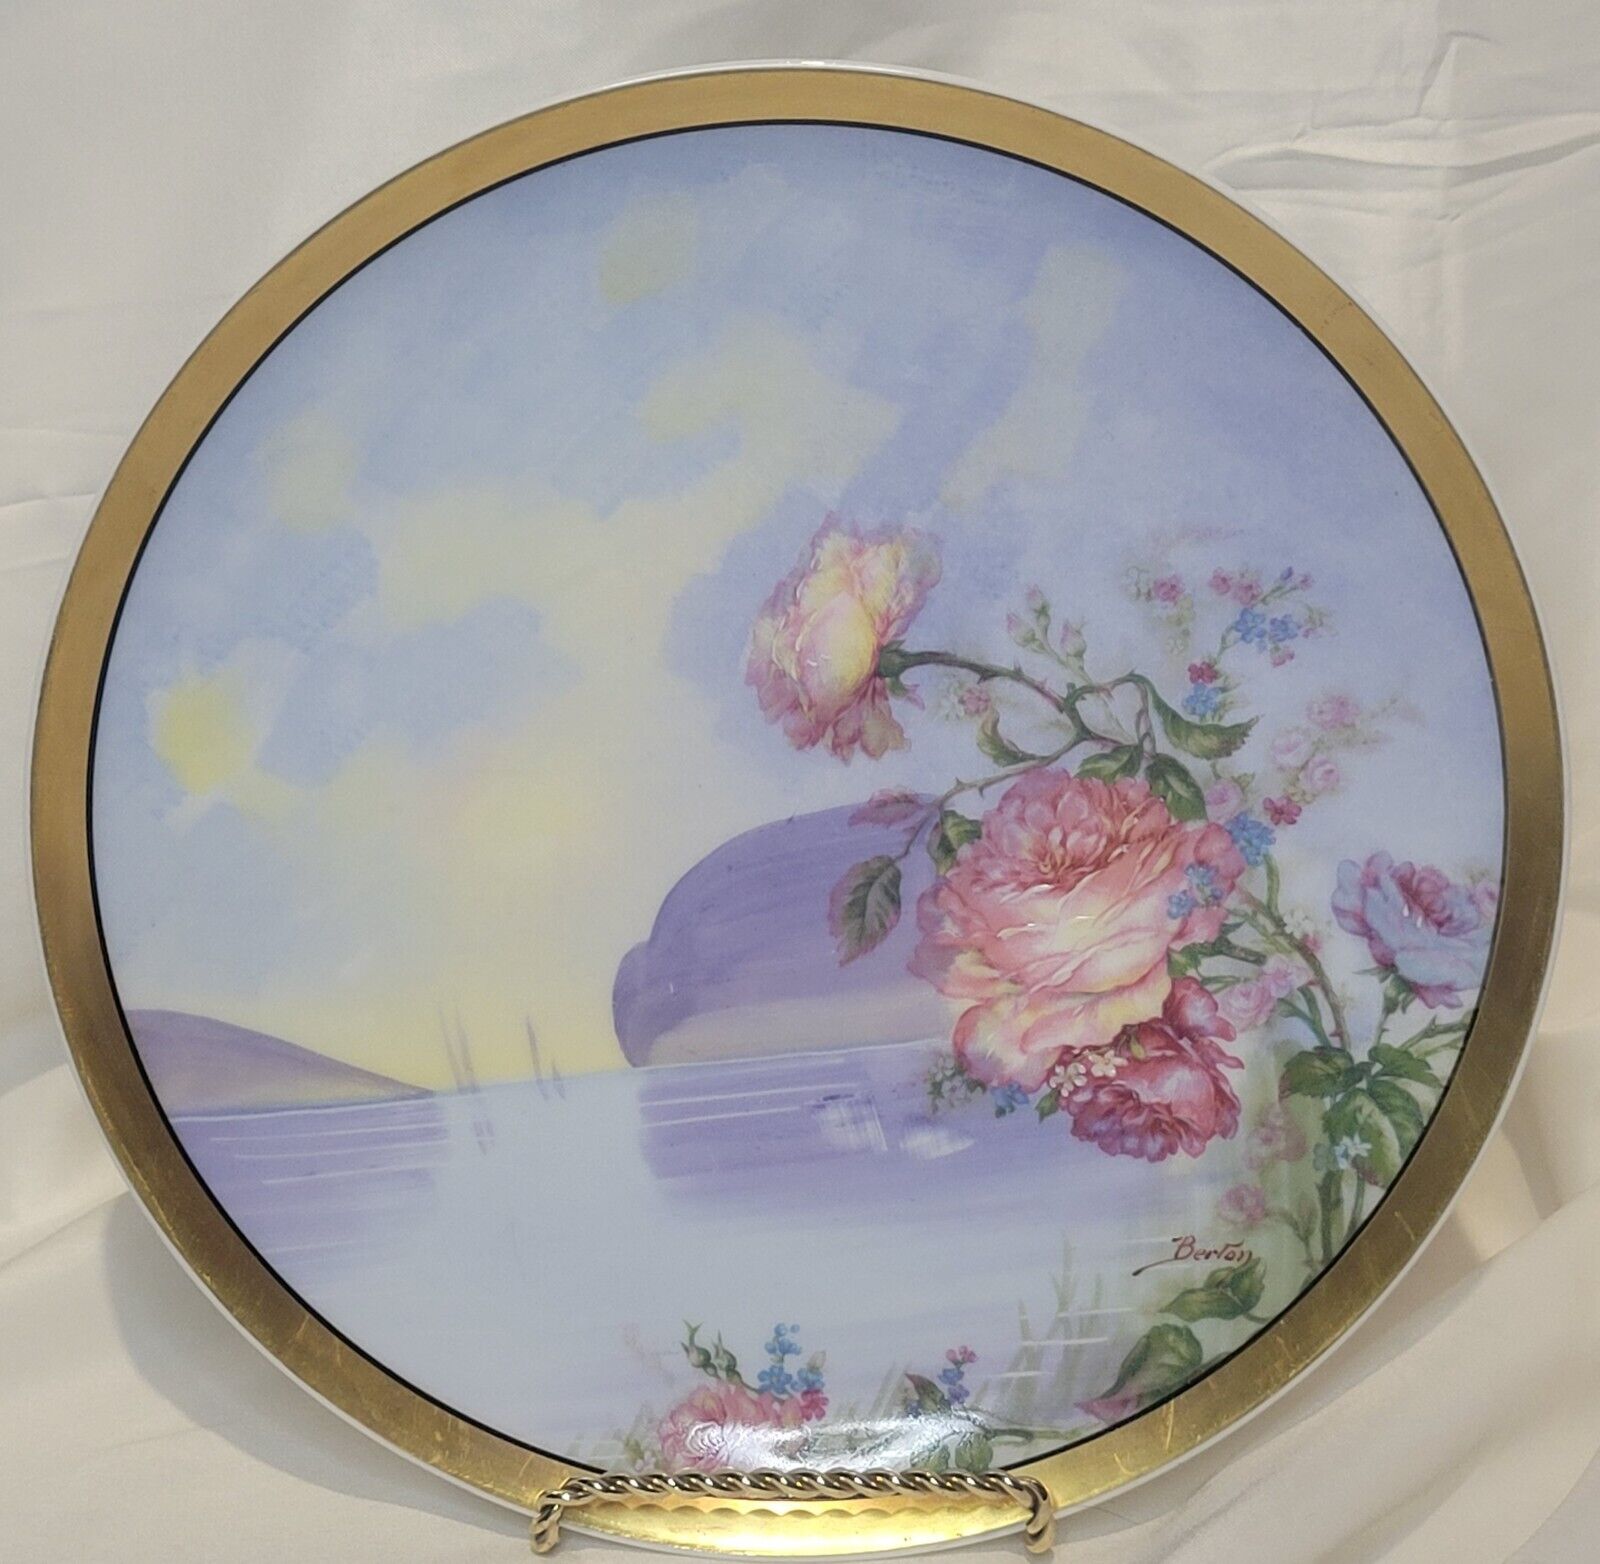 limoges hand painted plate marked Haviland France painted with lake scene